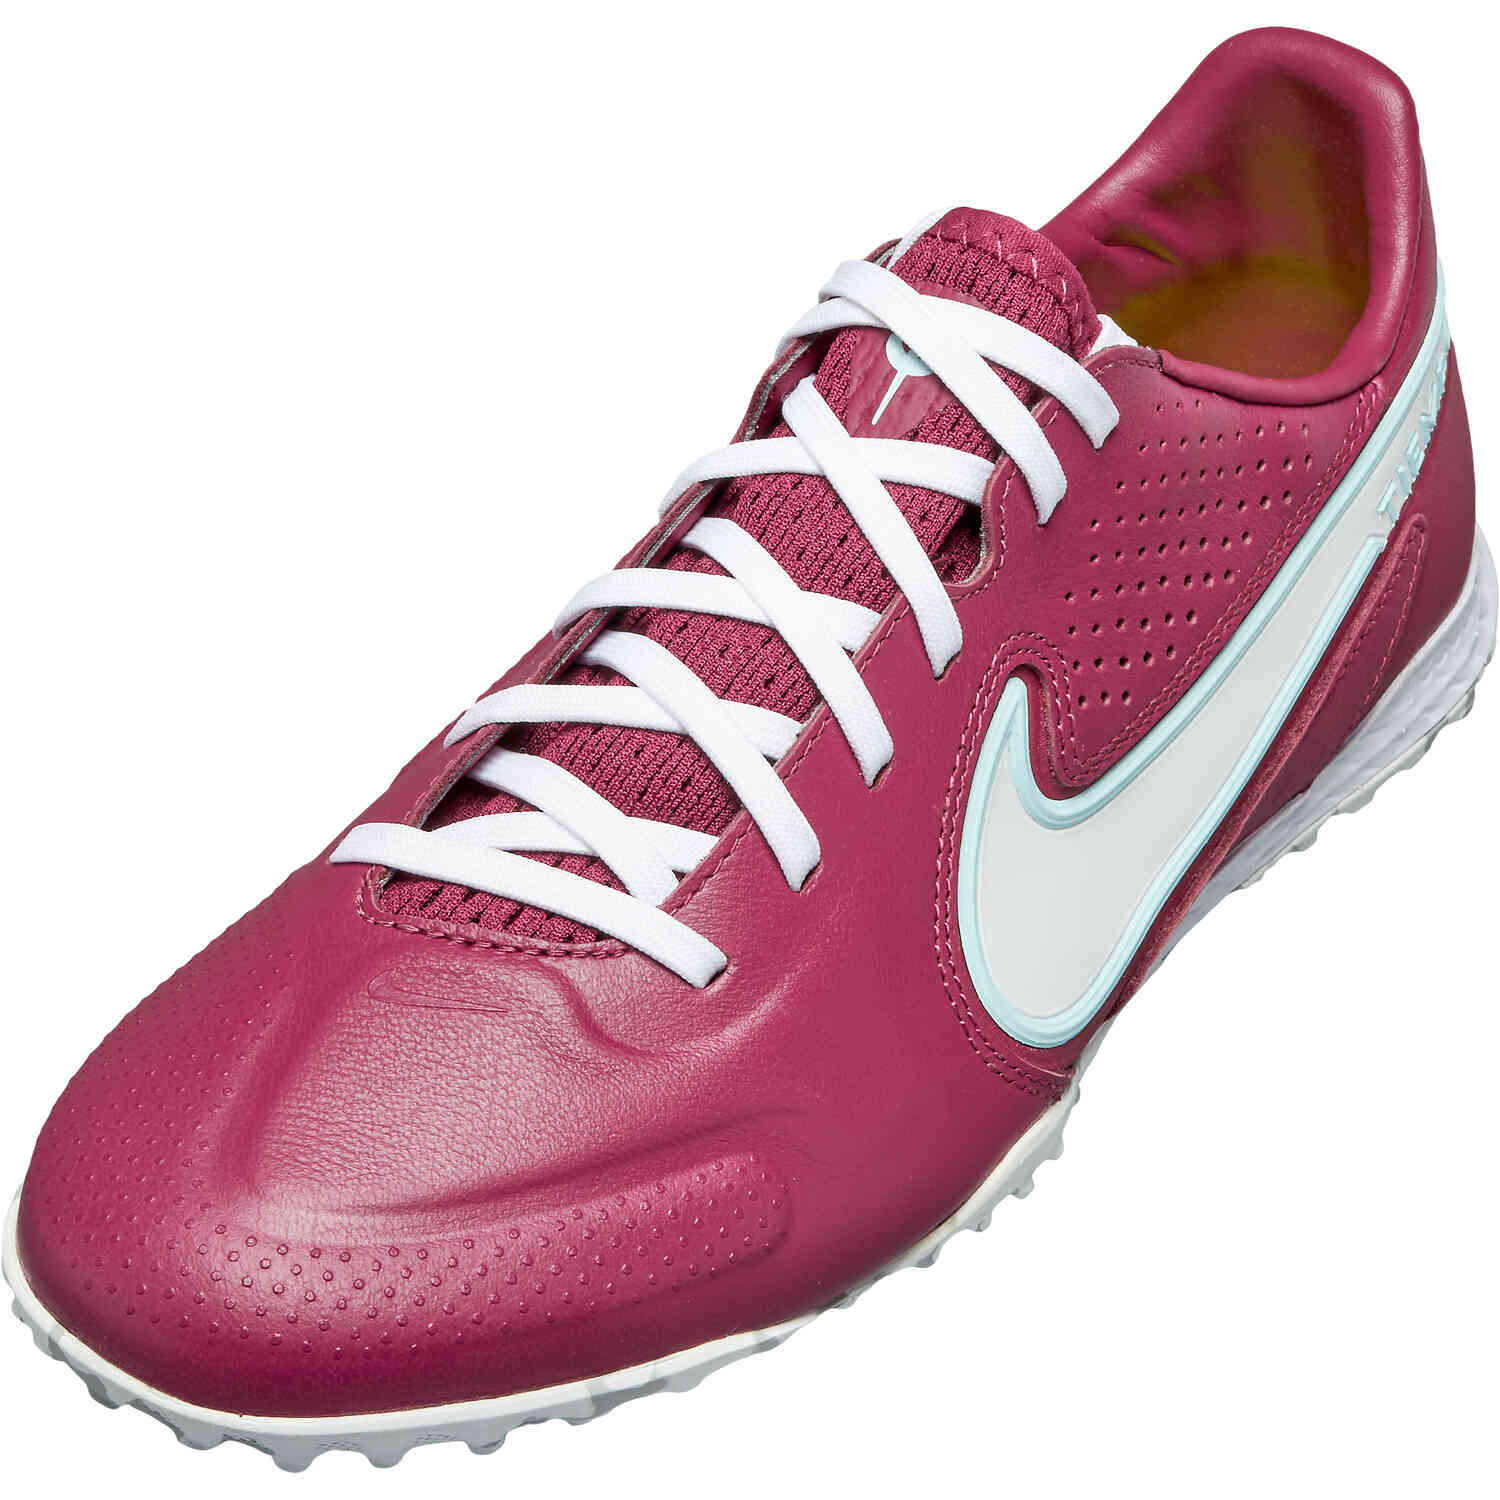 Nike Tiempo Legend Pro TF Rosewood & White with Glacier with Pink Foam SoccerPro